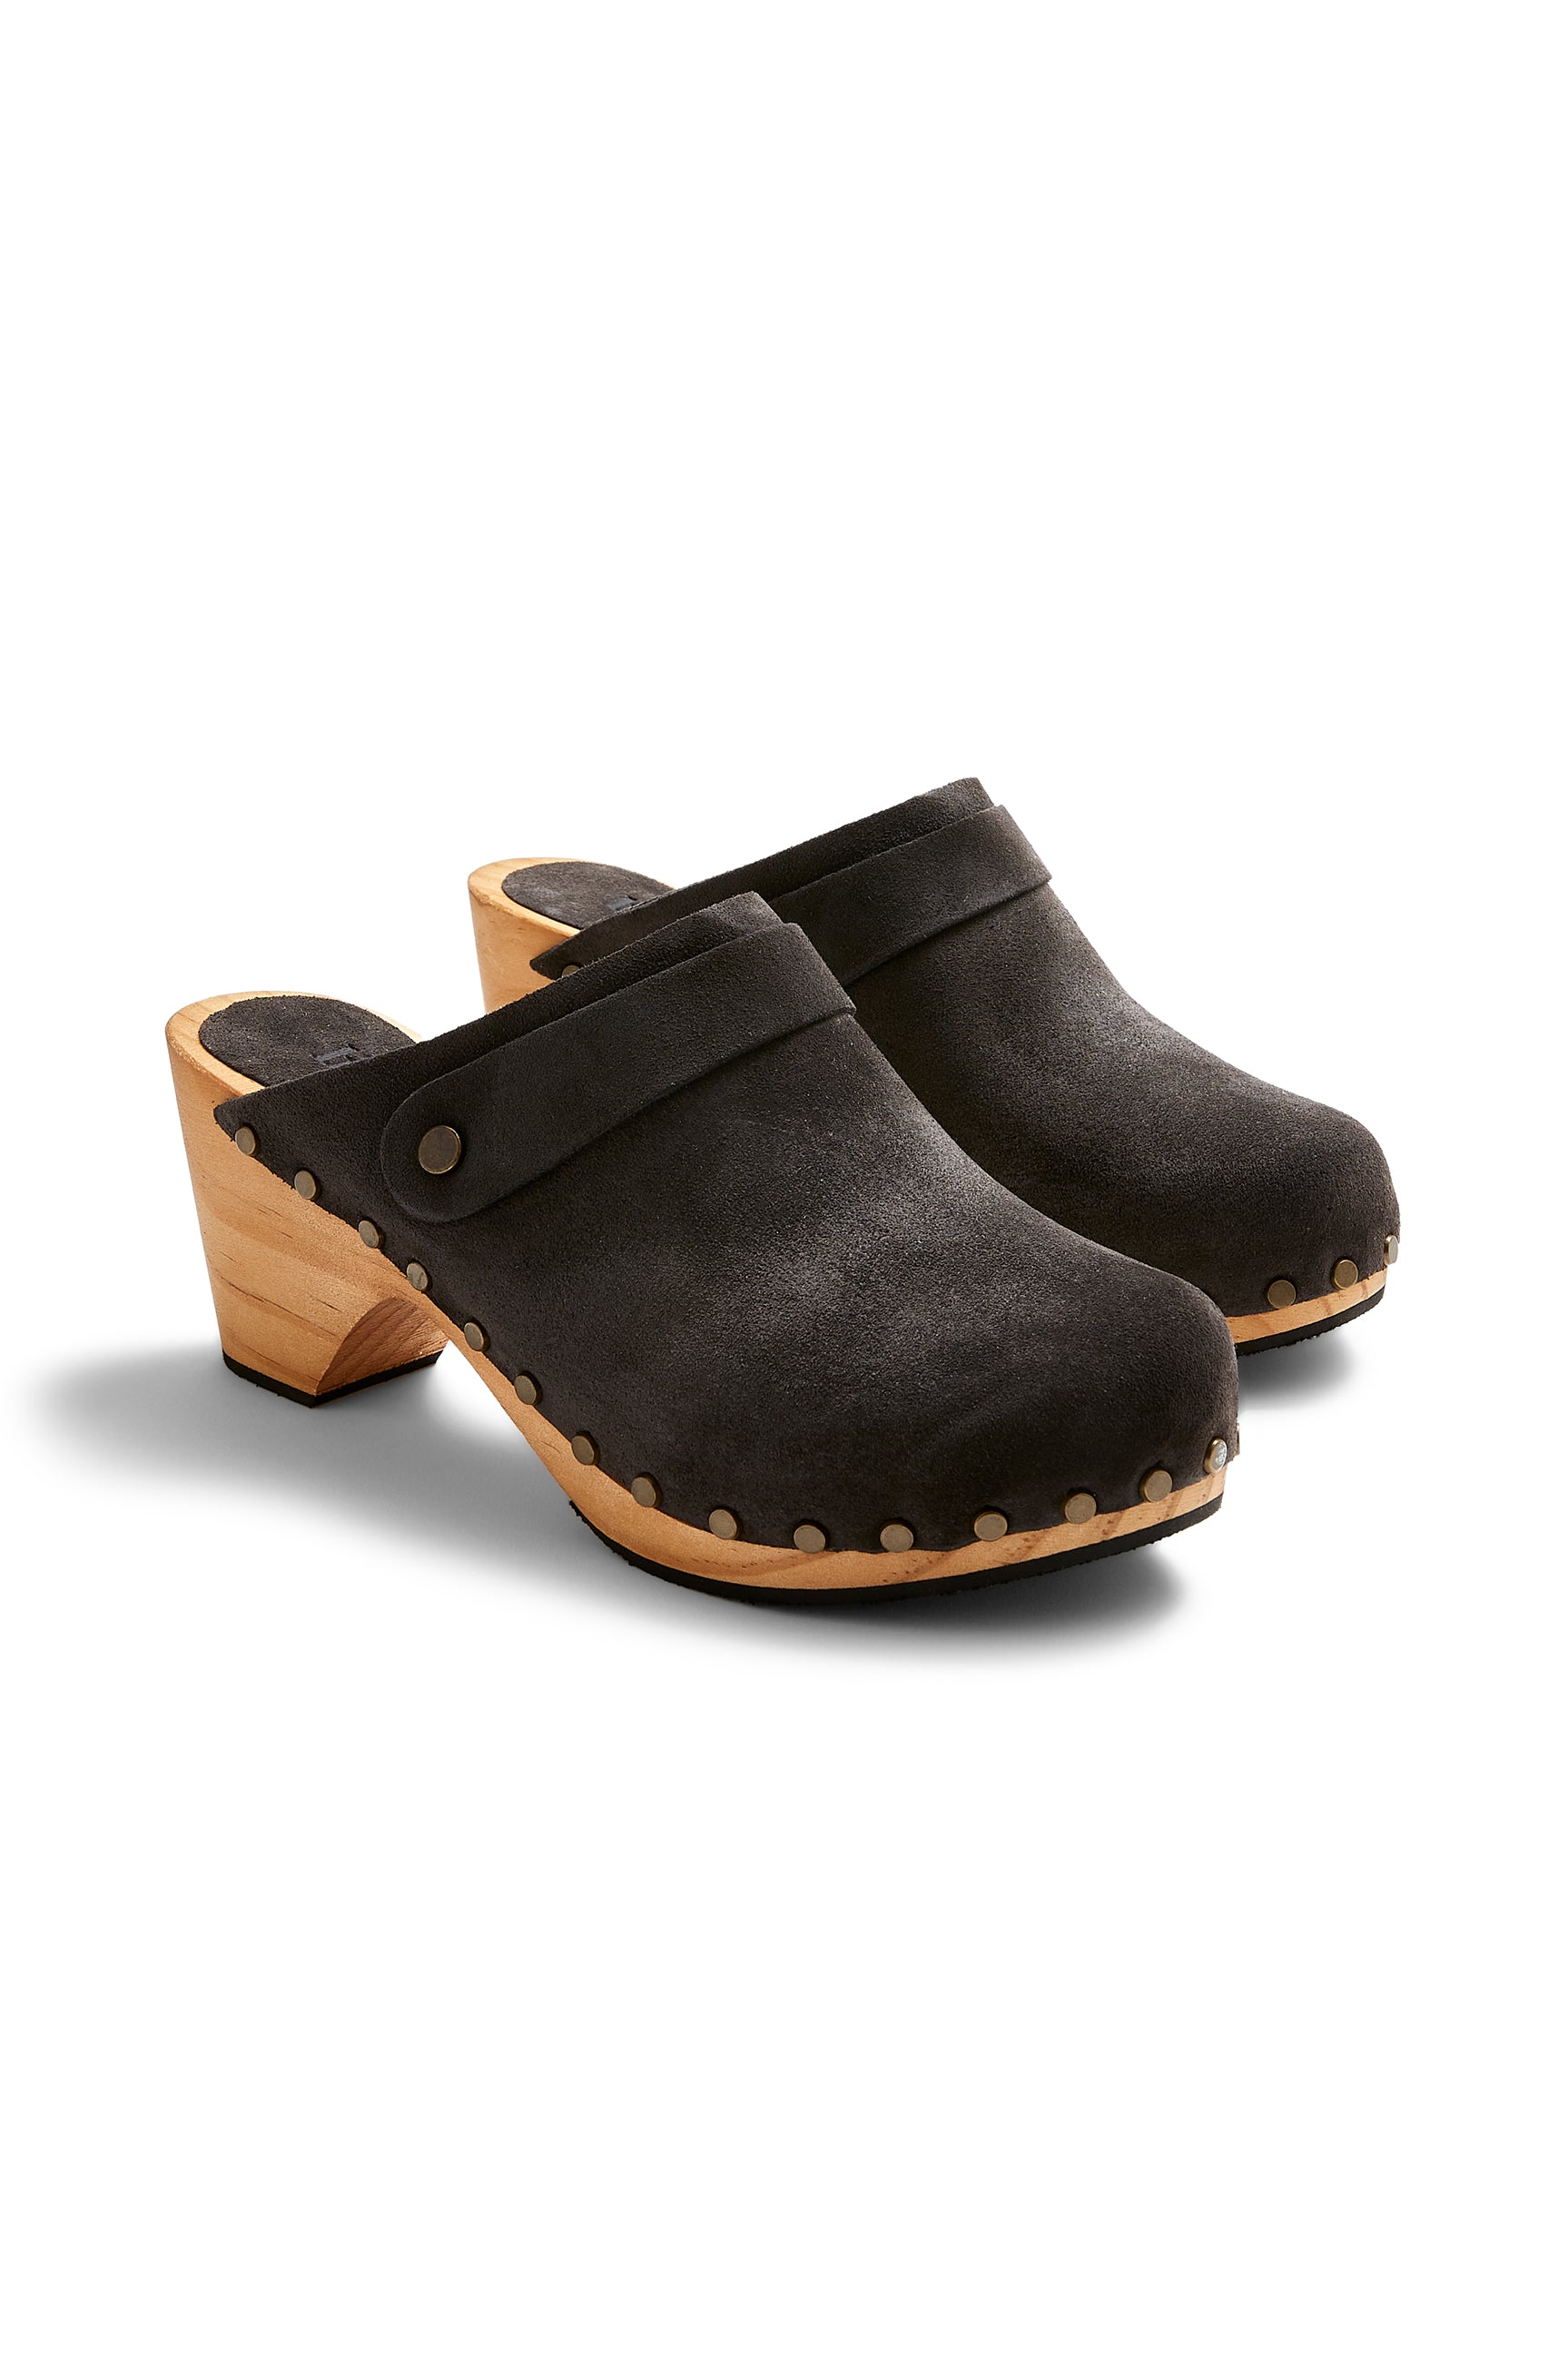 high heel classic clogs in coal suede - ships end of April Clogs lisa b. coal suede 36 (US 5.5-6) 